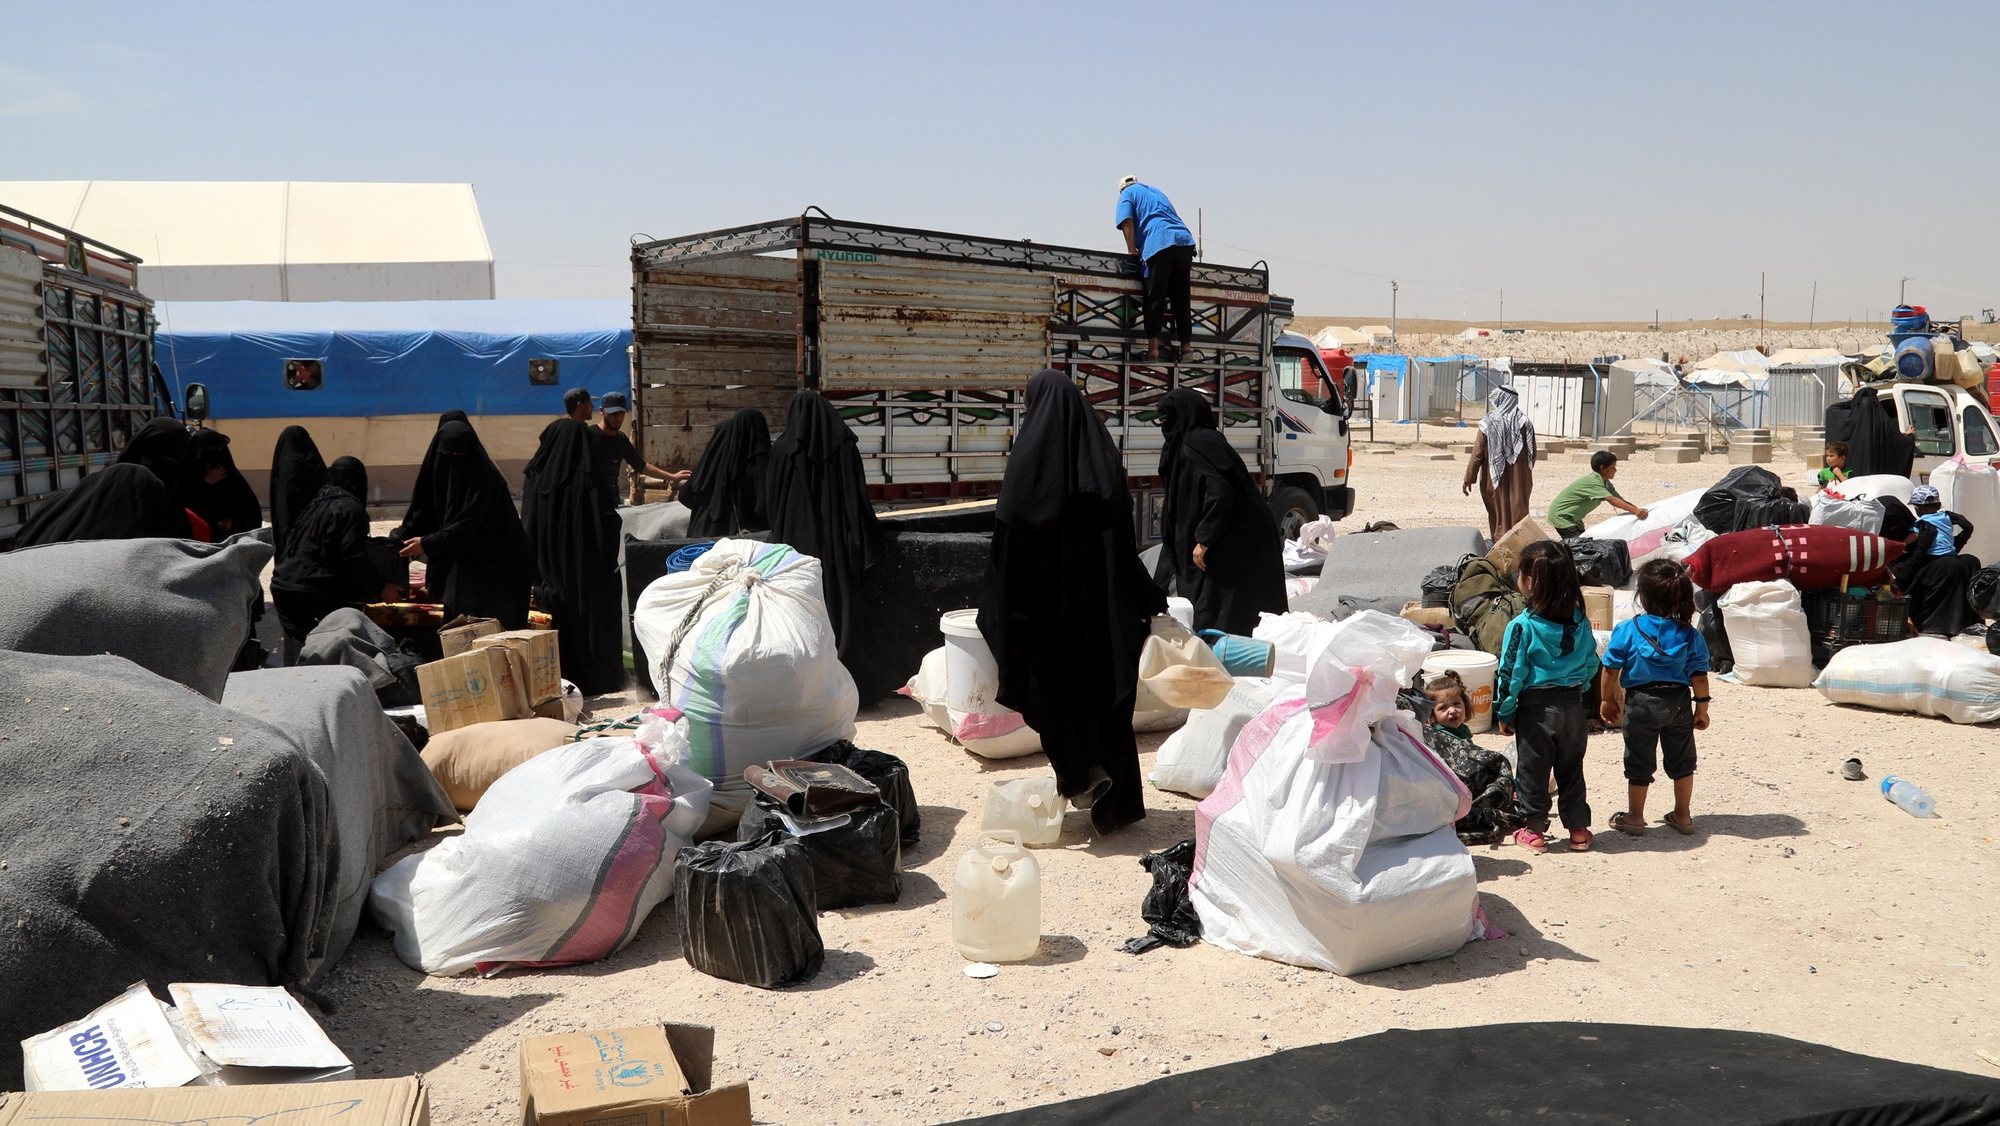 epa07623494 Wives of Islamic state fighters (IS) load their belongings into a truck upon their deportation from the al-Hol camp for refugees in al-Hasakah governorate in northeastern Syria on 03 June 2019 (issued 04 June 2019).  According to media reports, the Kurdish authorities in northeast Syria are handing over 800 women and children all of them Syrian, including relatives of Islamic state fighters, to their families in the first such transfer from an overcrowded camp.  EPA/AHMED MARDNLI